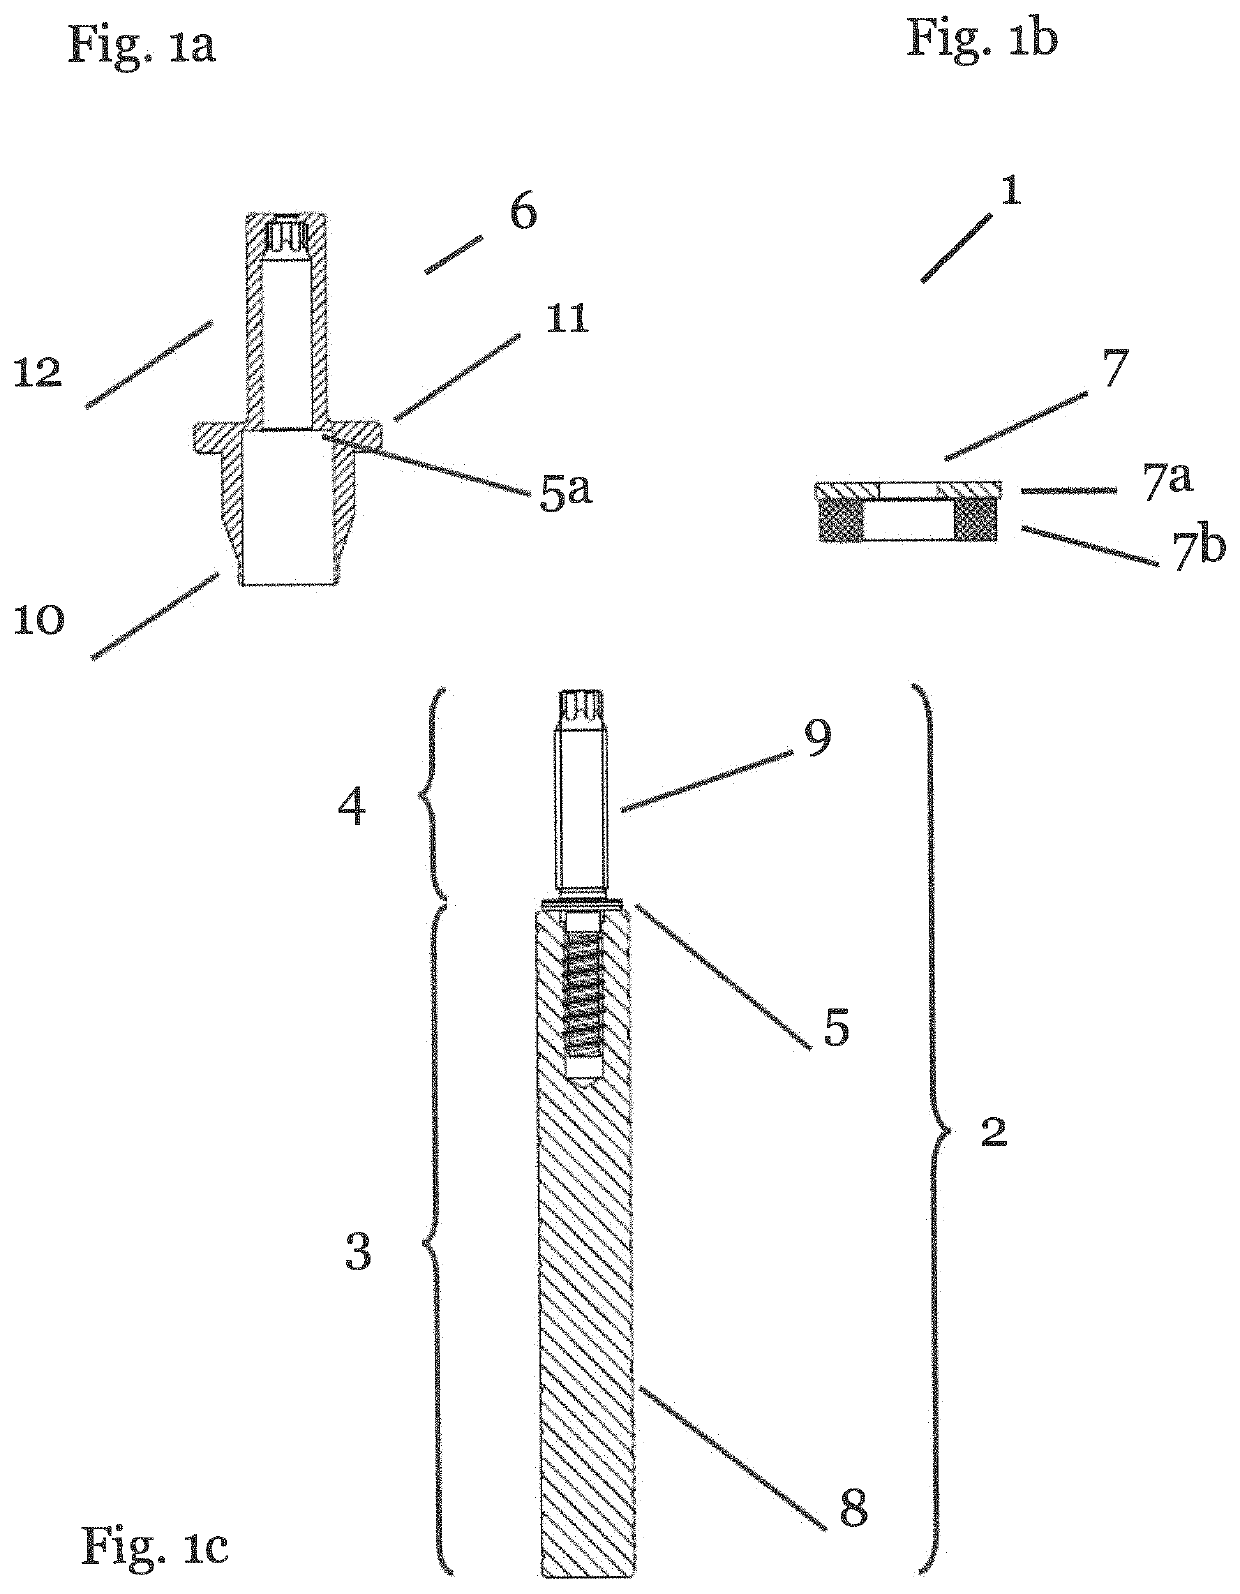 System for fastening attachments to a substrate with an insulation layer